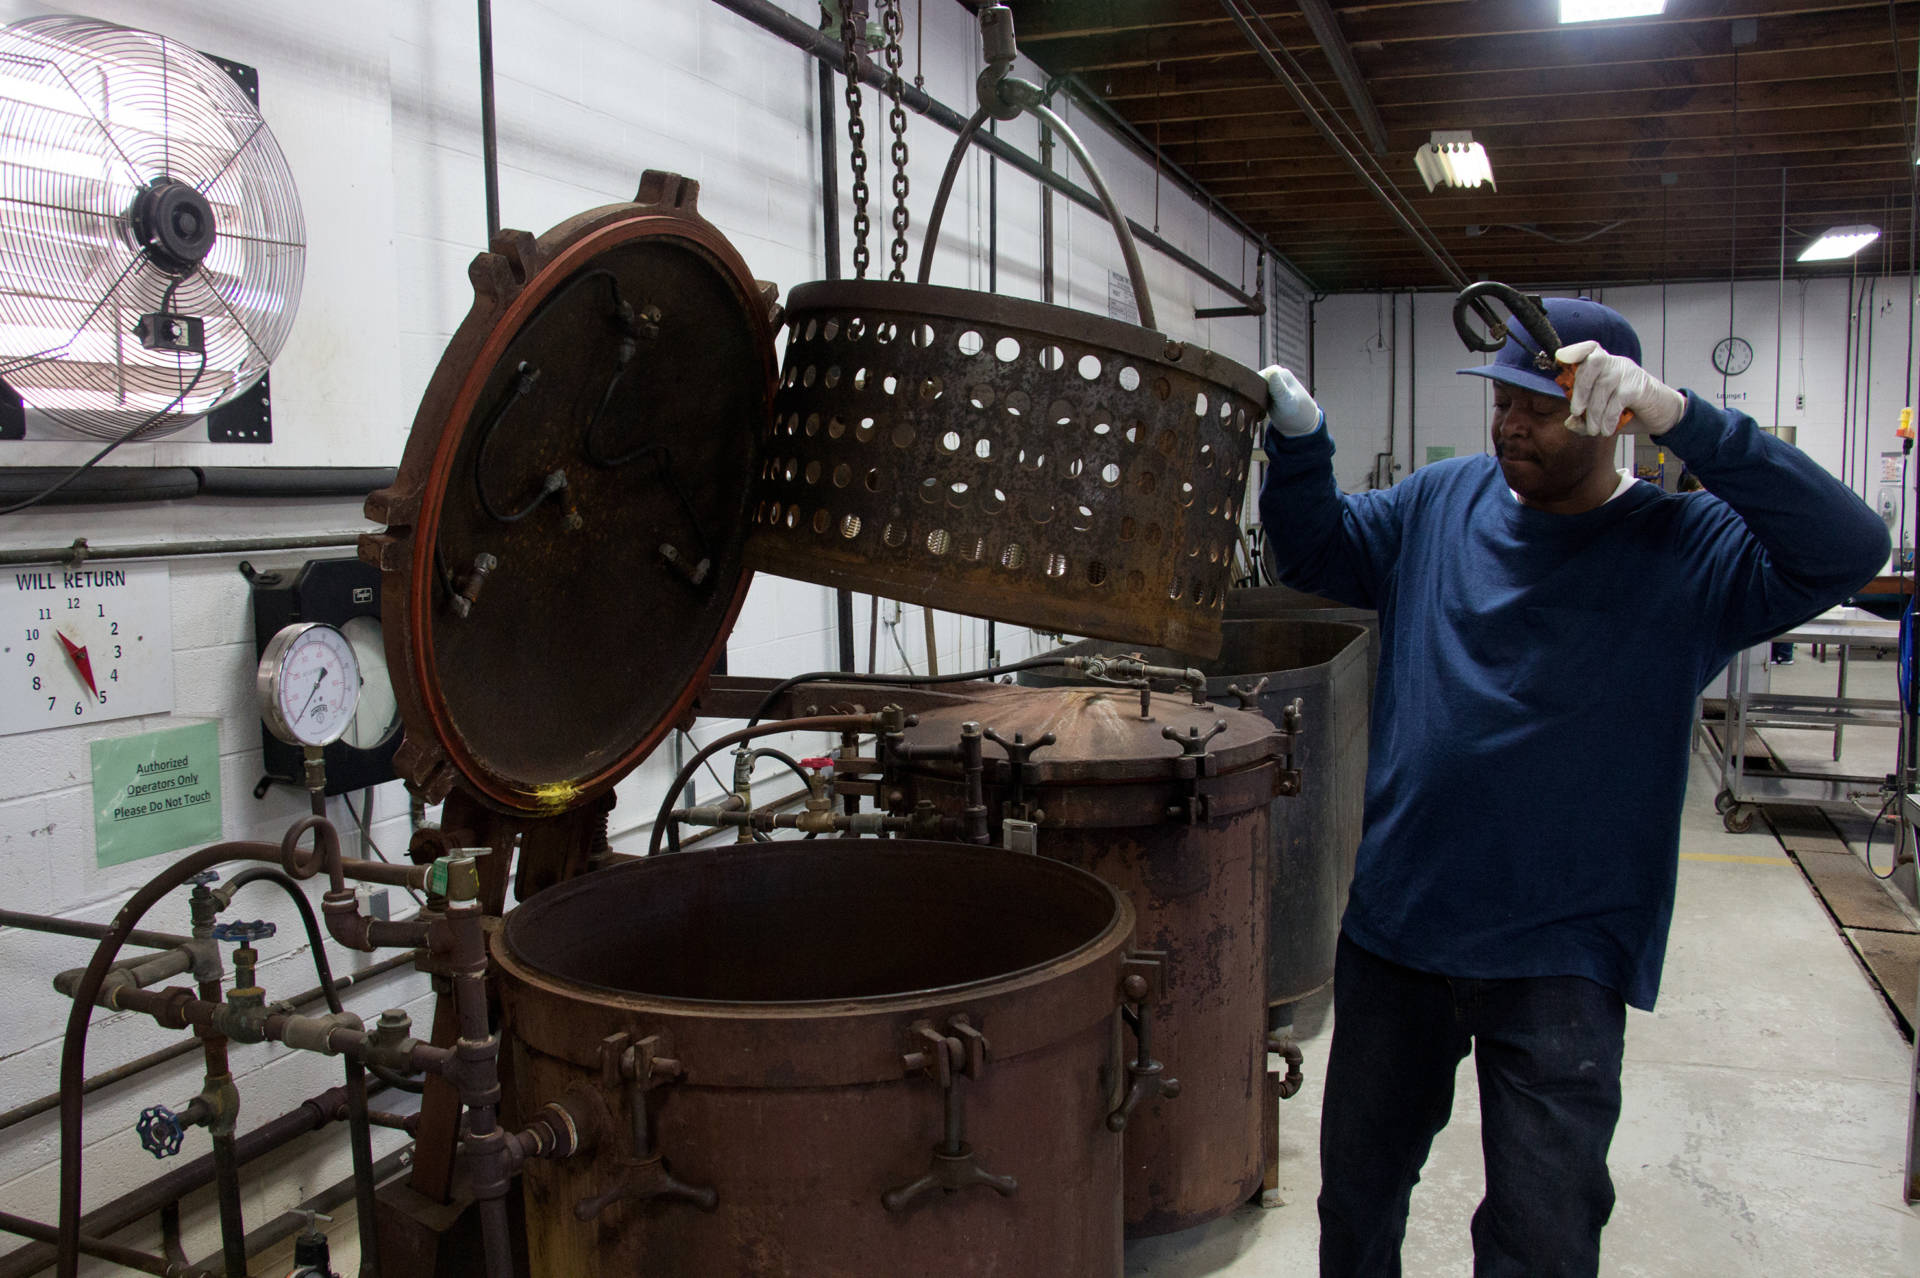 Rodney Scott, who works at the public cannery, loads a batch of cans into one of the two giant pressure cookers in the cannery.